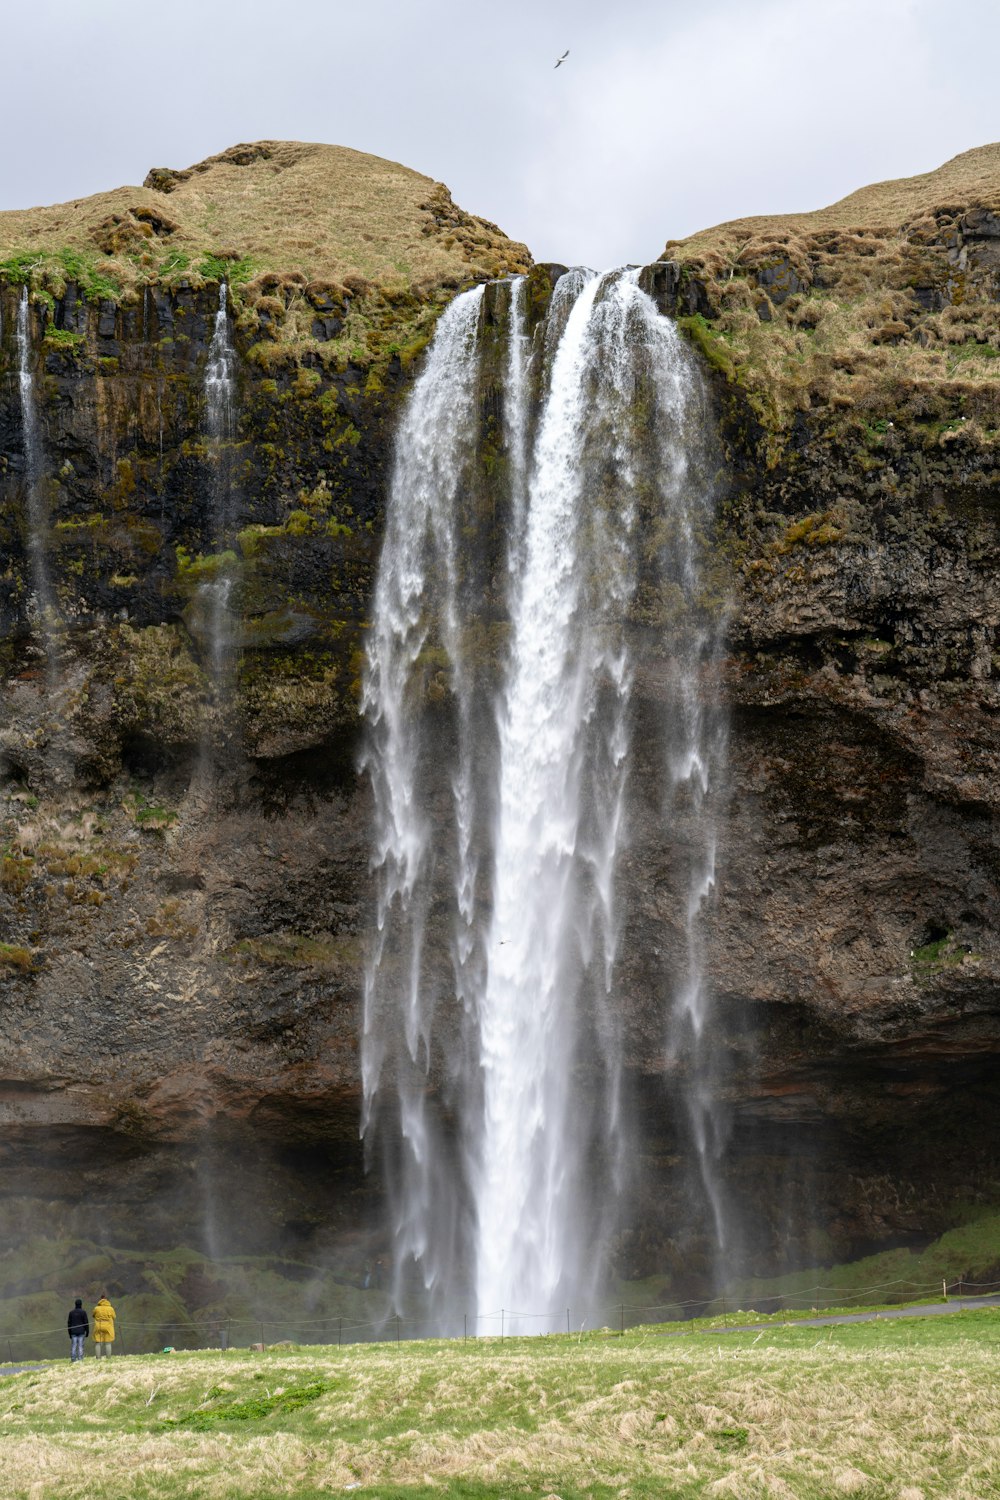 a large waterfall with a person sitting under it